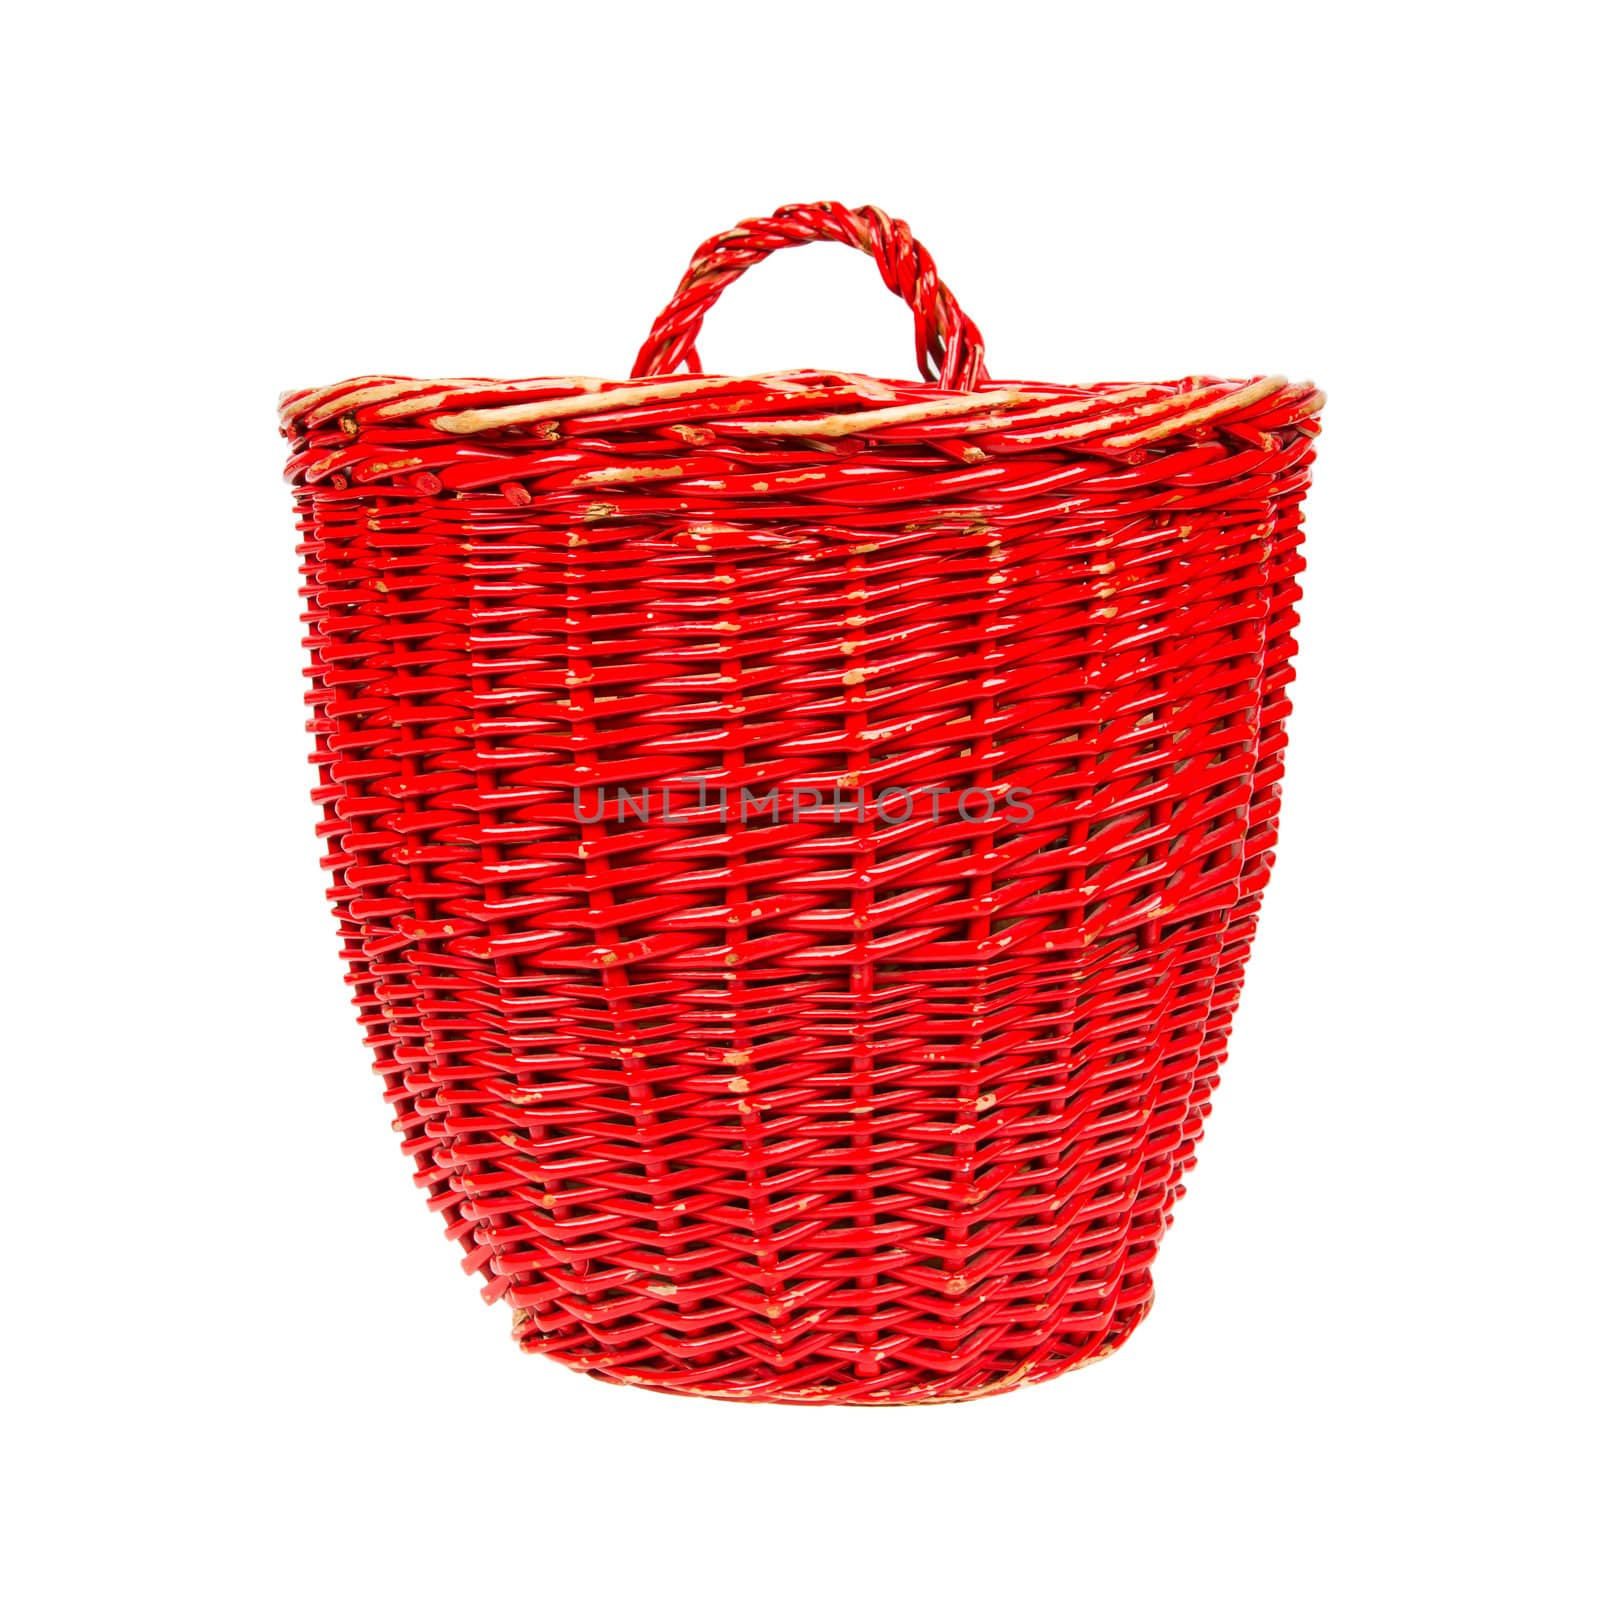 Very old red basket  by michaklootwijk